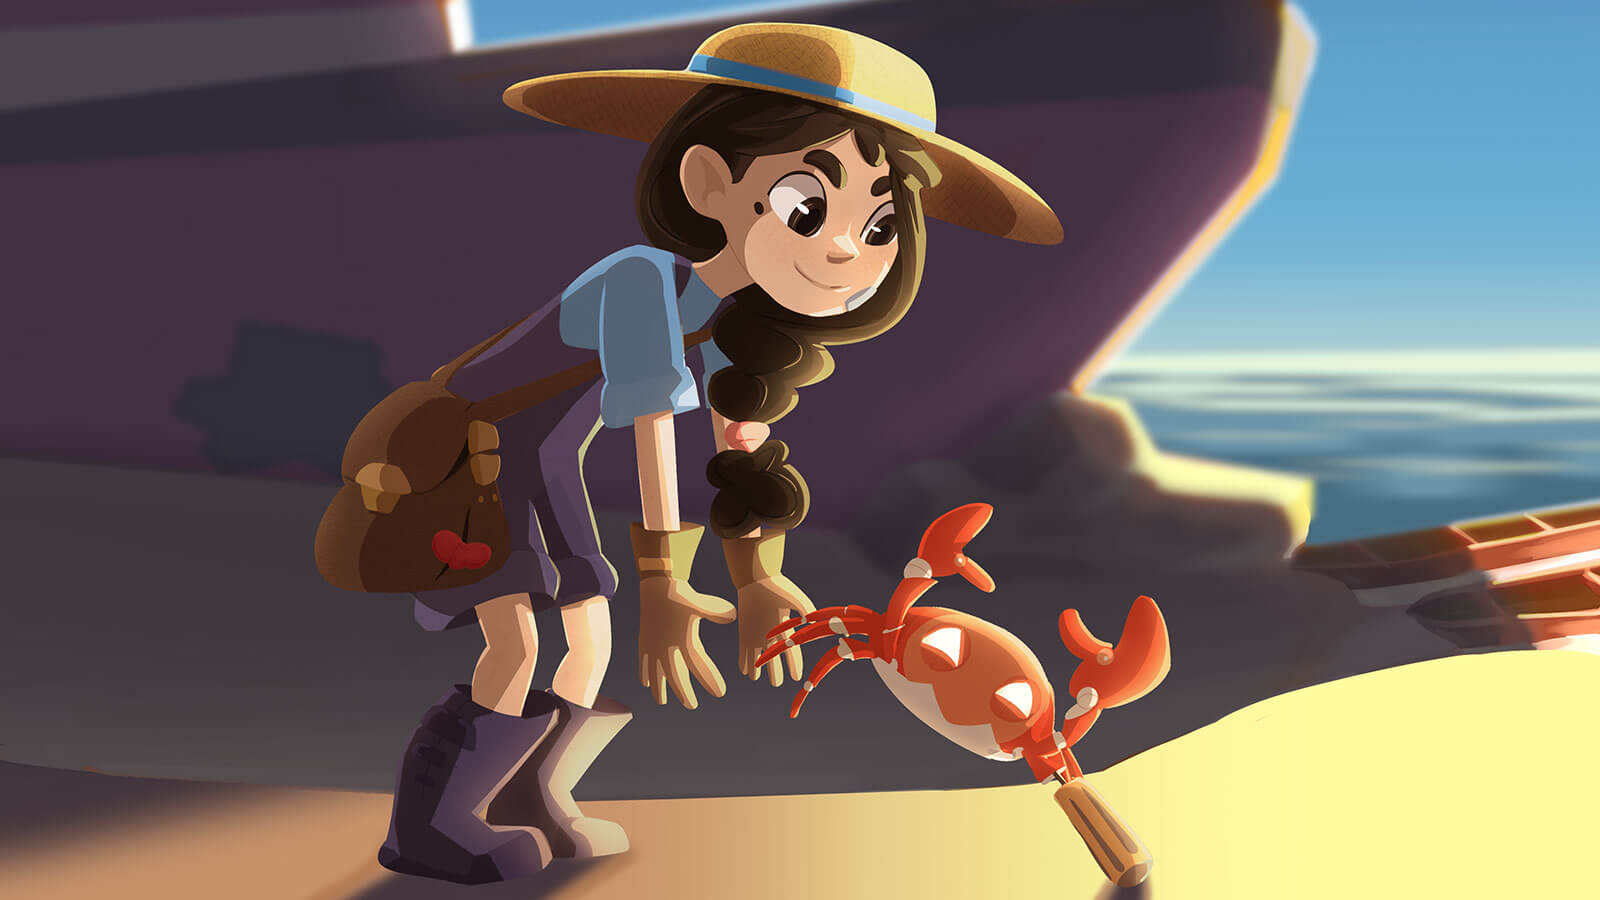 Girl encounters a crab on the beach